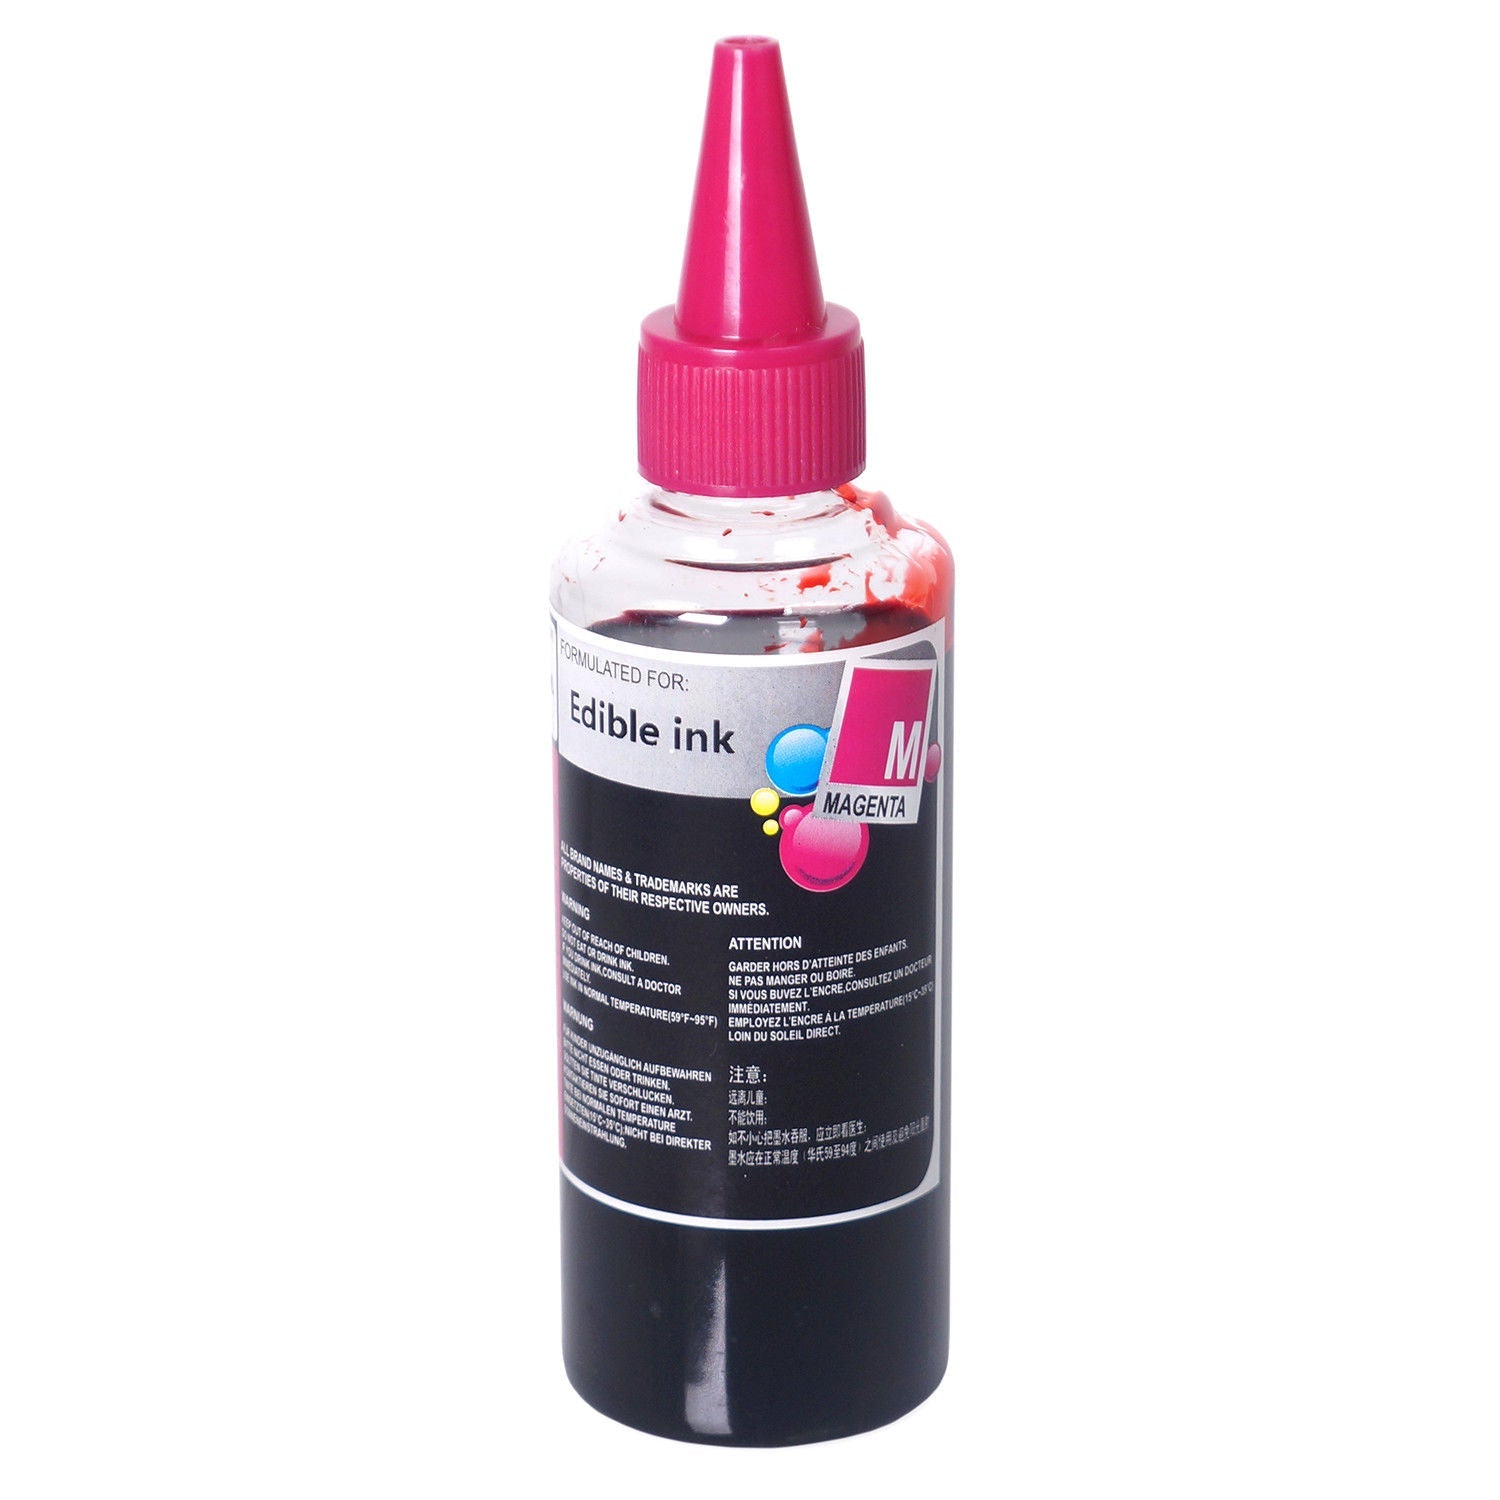 100ml Magenta Edible Ink Refill Bottle Compatible for Canon Cartridge